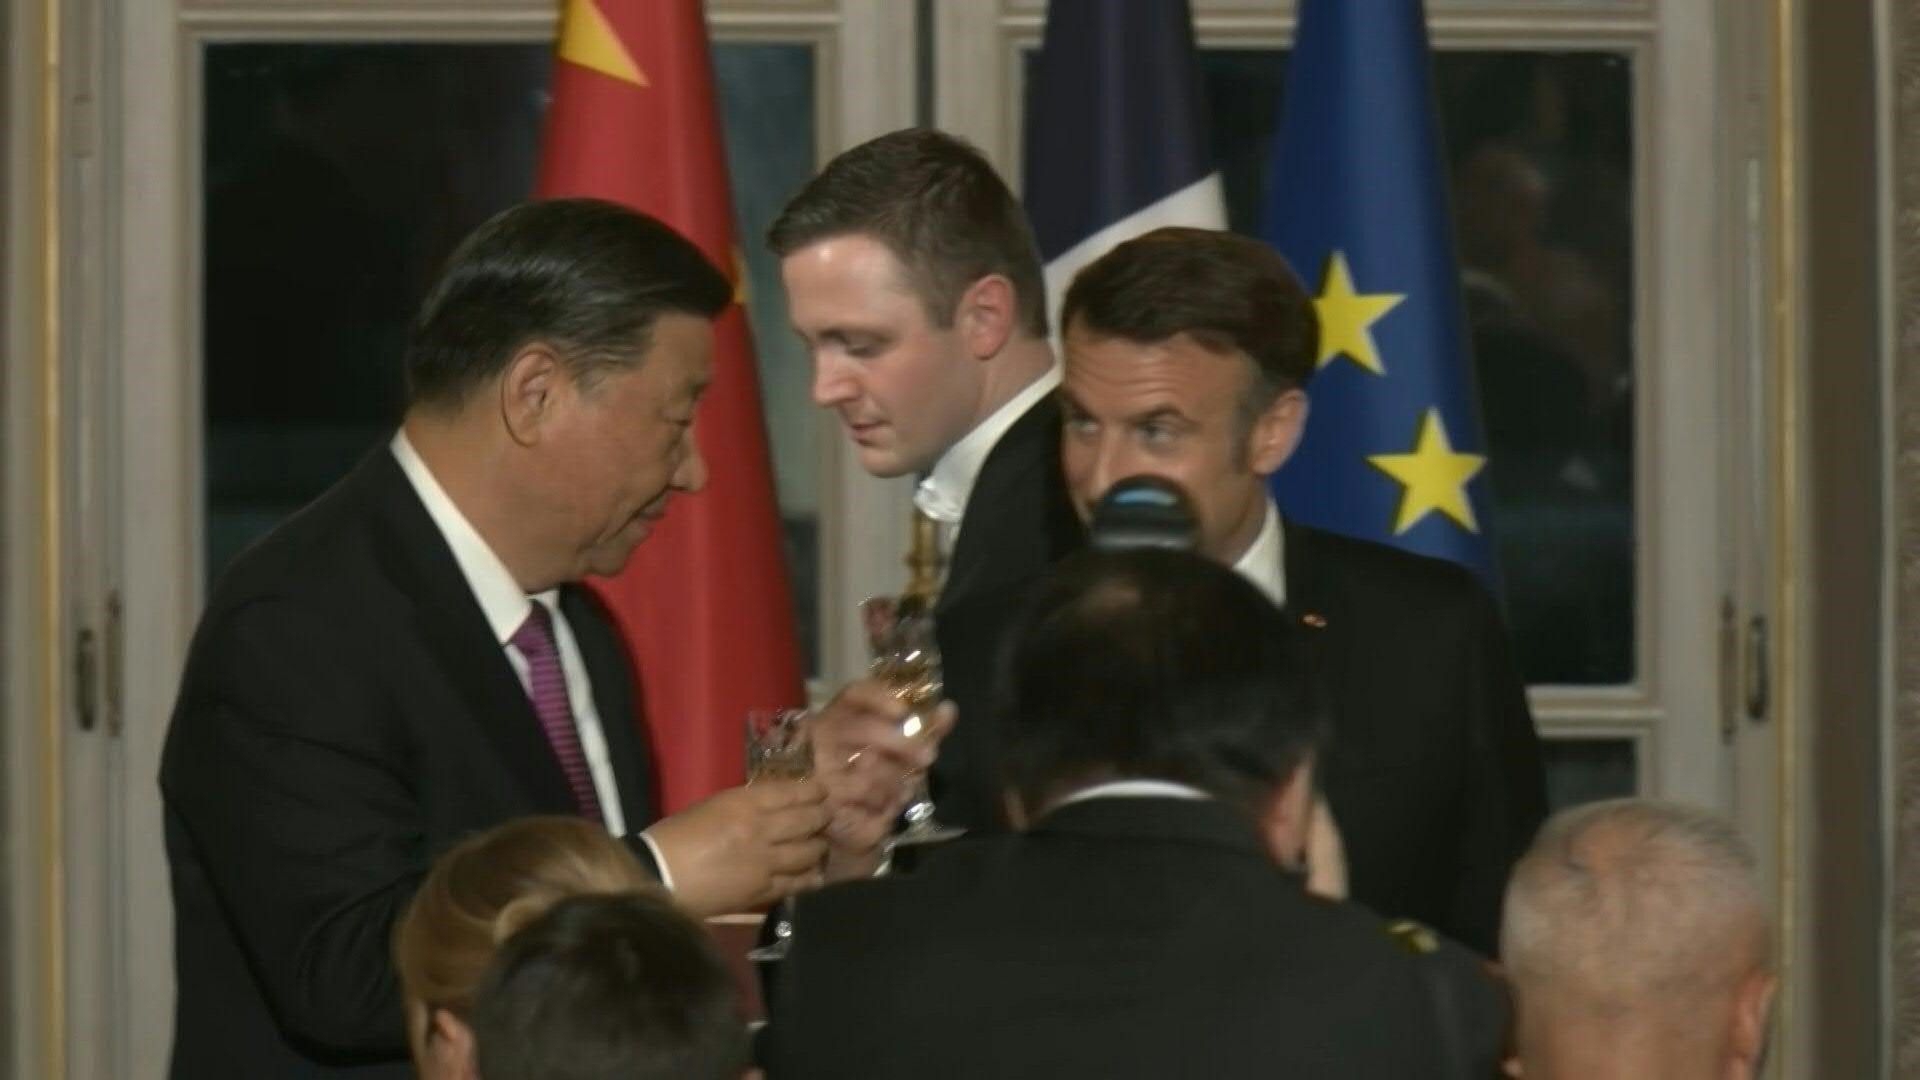 Macron and Xi toast at a state dinner at the Elysee Palace